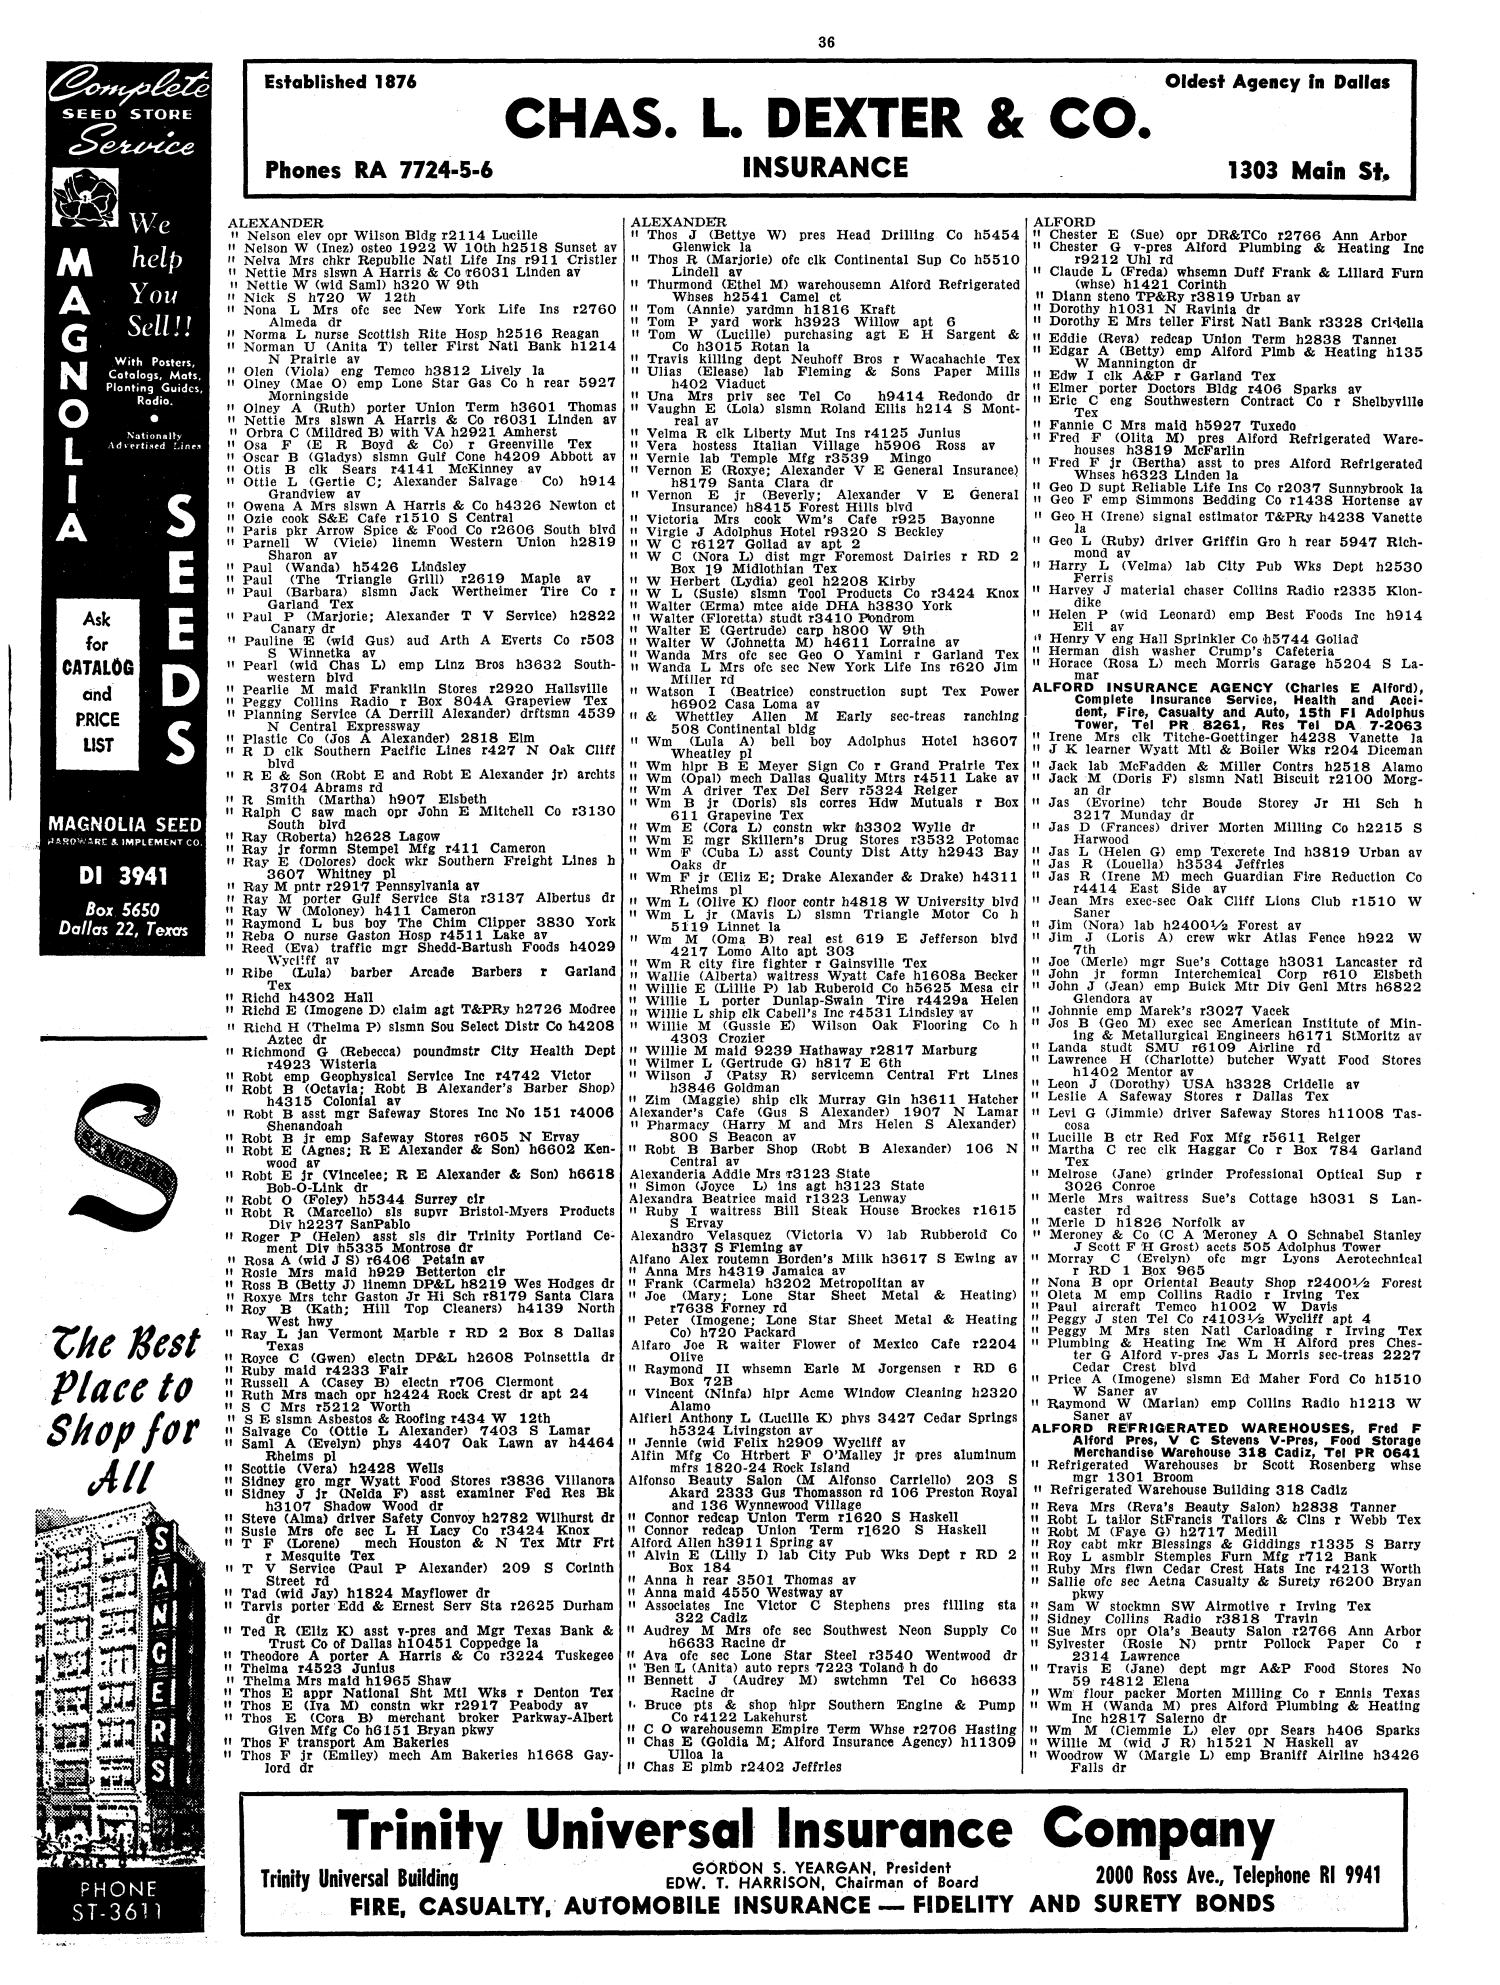 Dallas City Directory, 1956 - Page 36 - The Portal to Texas History